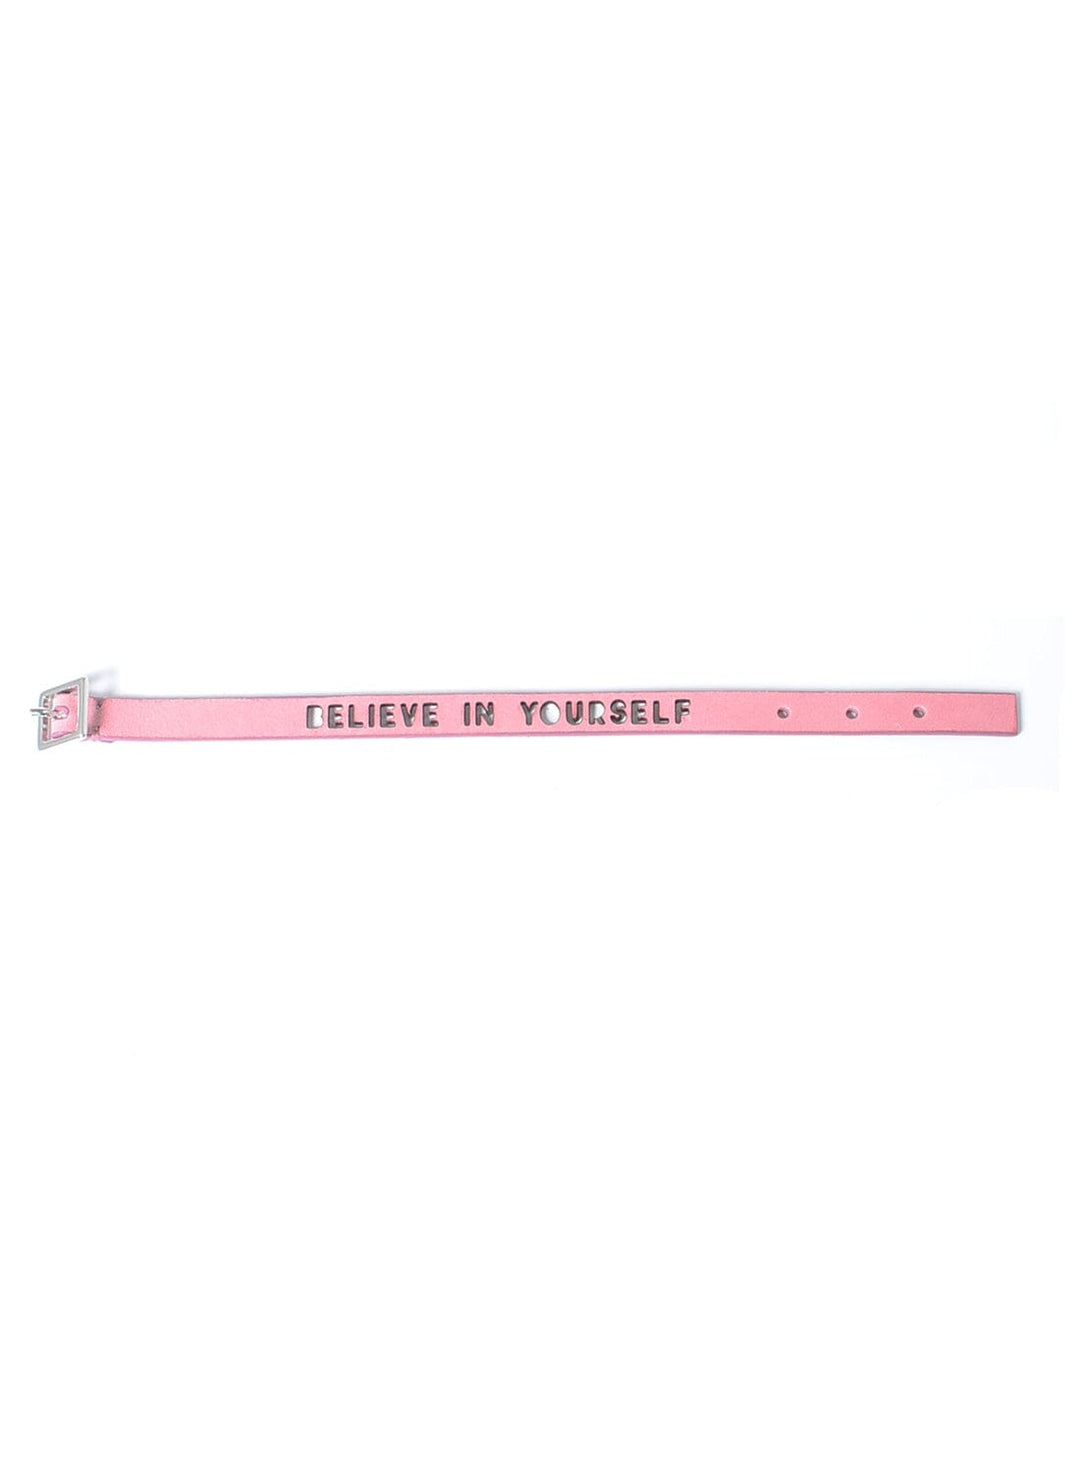 Believe in Yourself Washed Pink Leather Bracelet Bracelets YBDFinds 